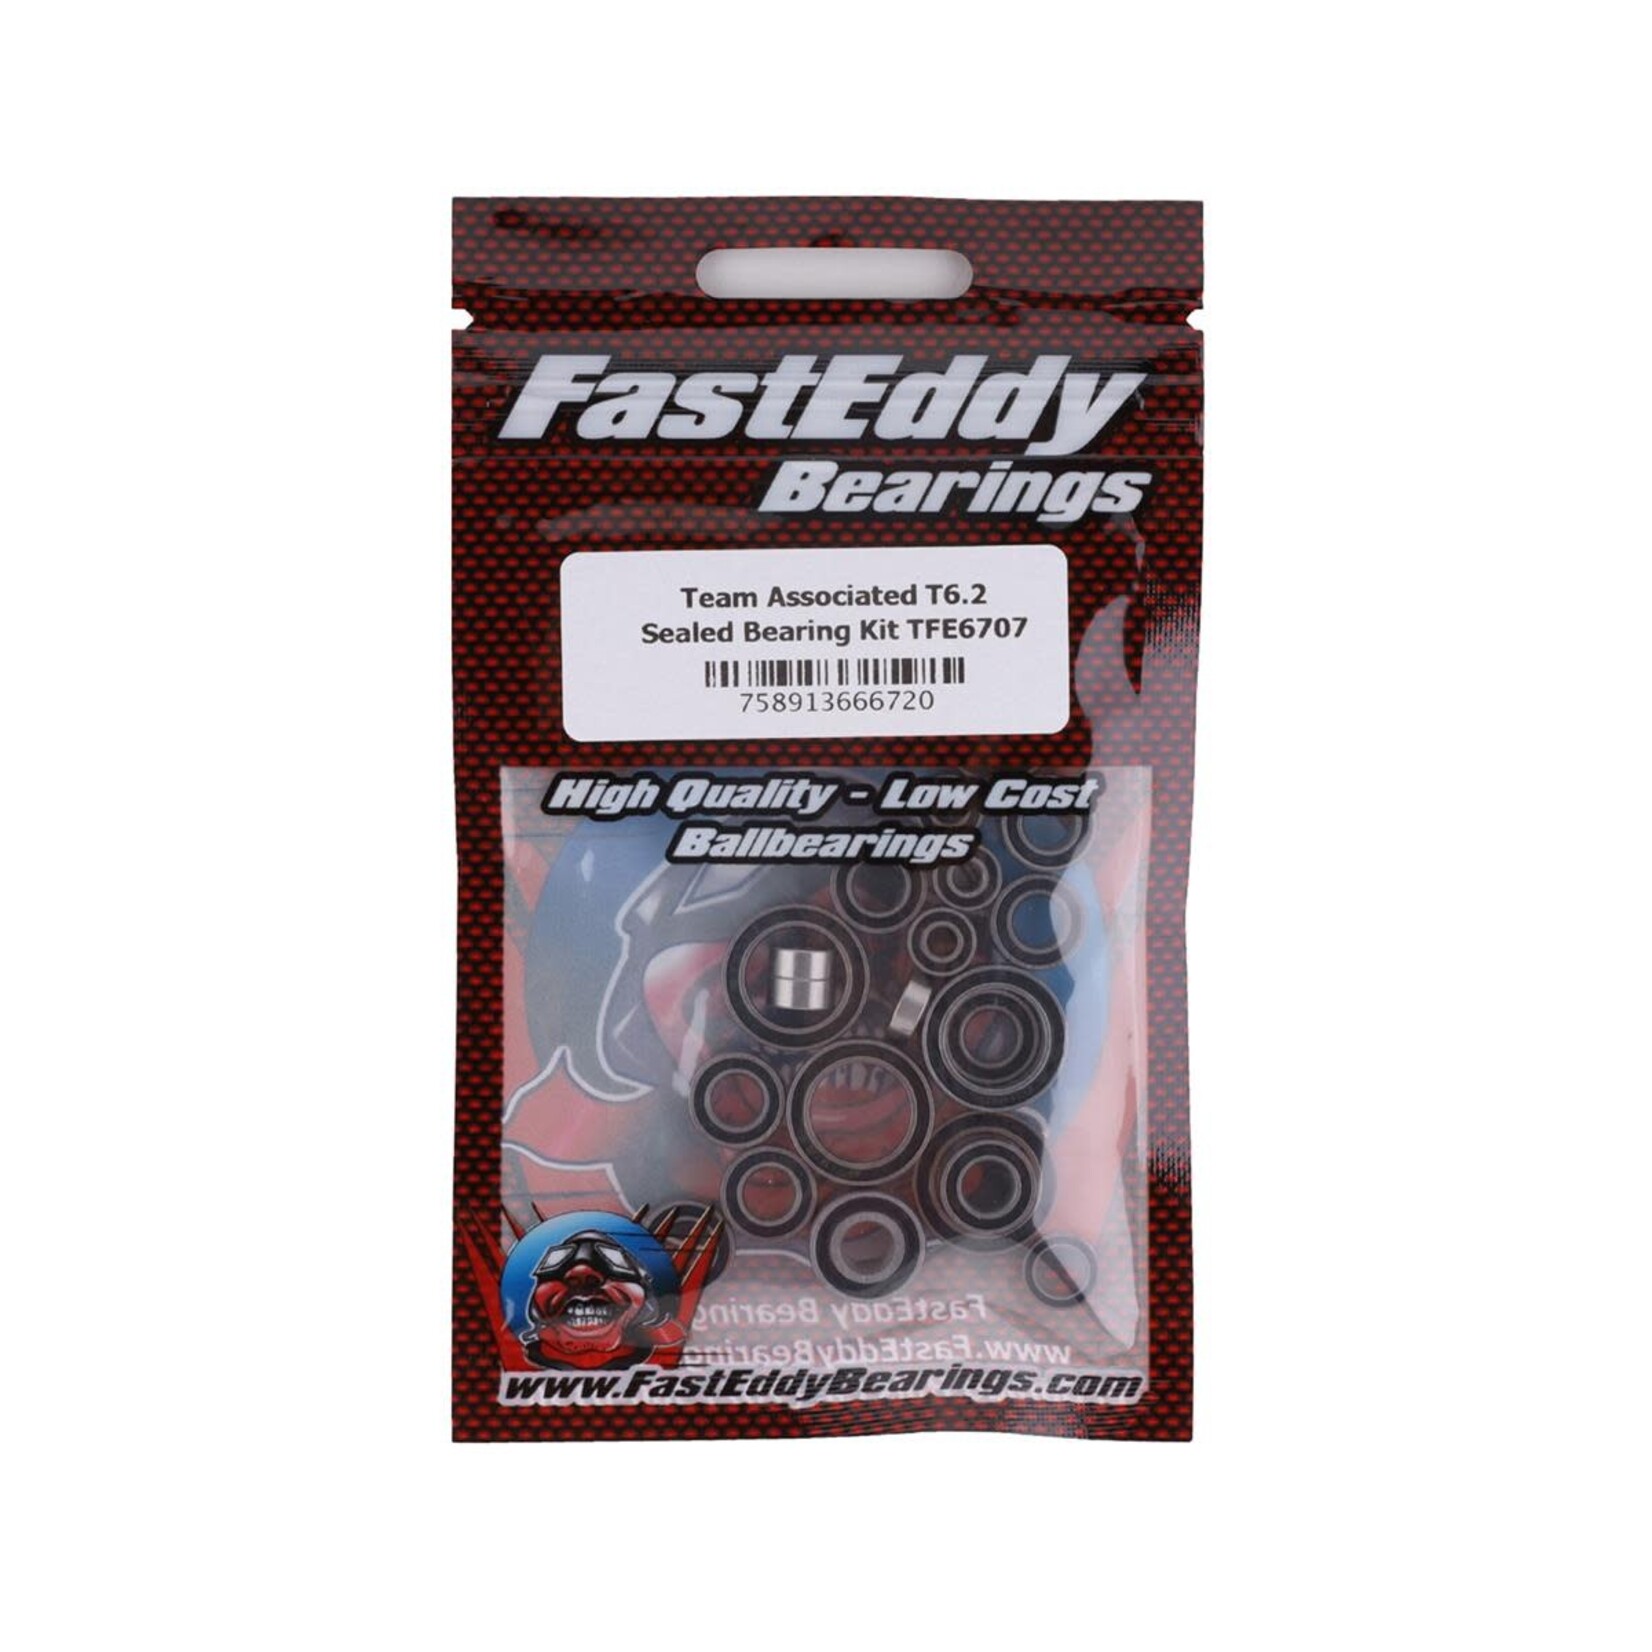 FastEddy FastEddy Team Associated T6.2 Sealed Bearing Kit #TFE6707